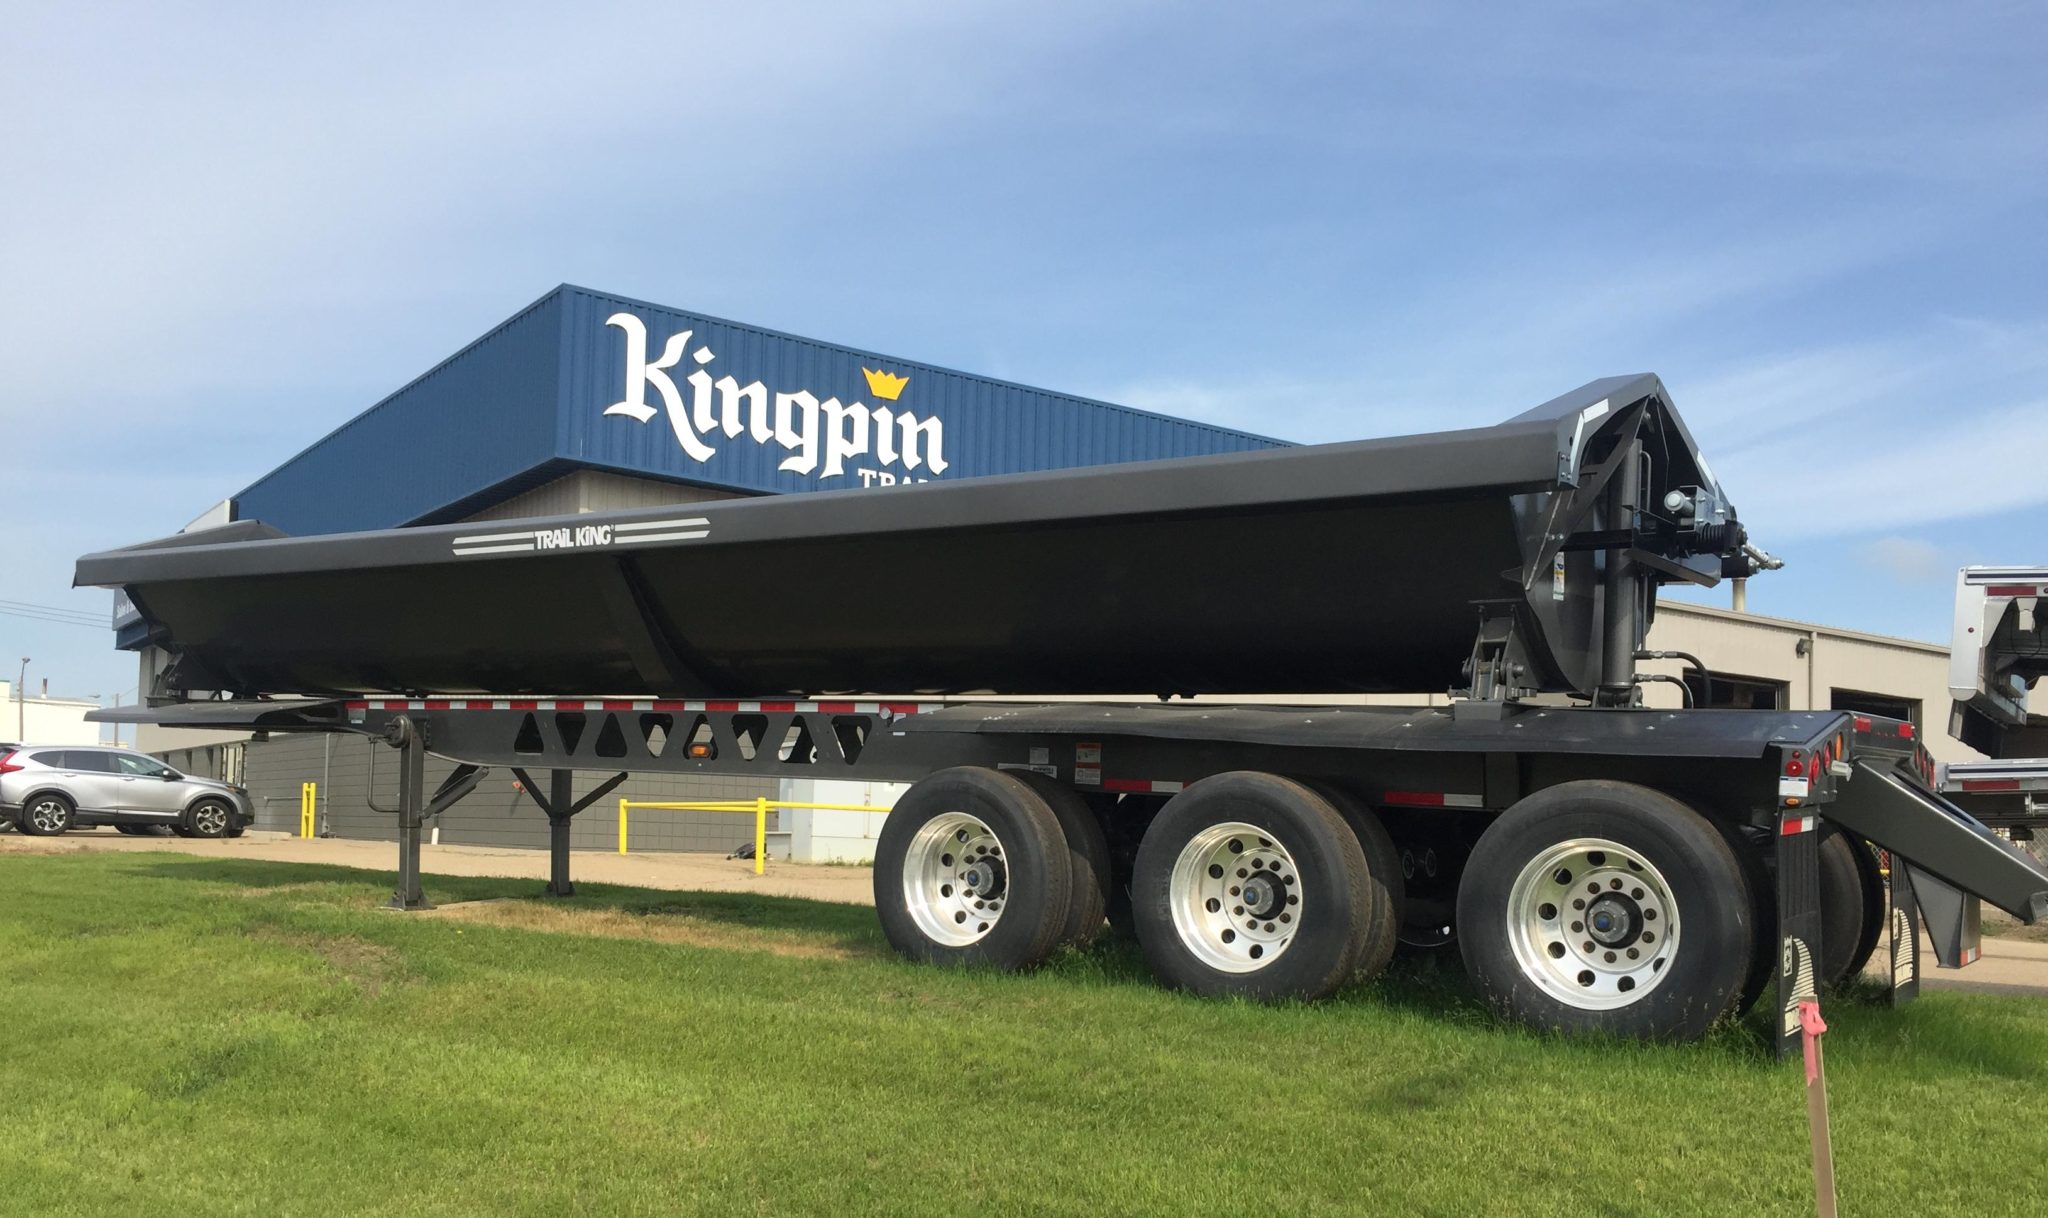 Side and End Dump Trailers: What’s The Difference?